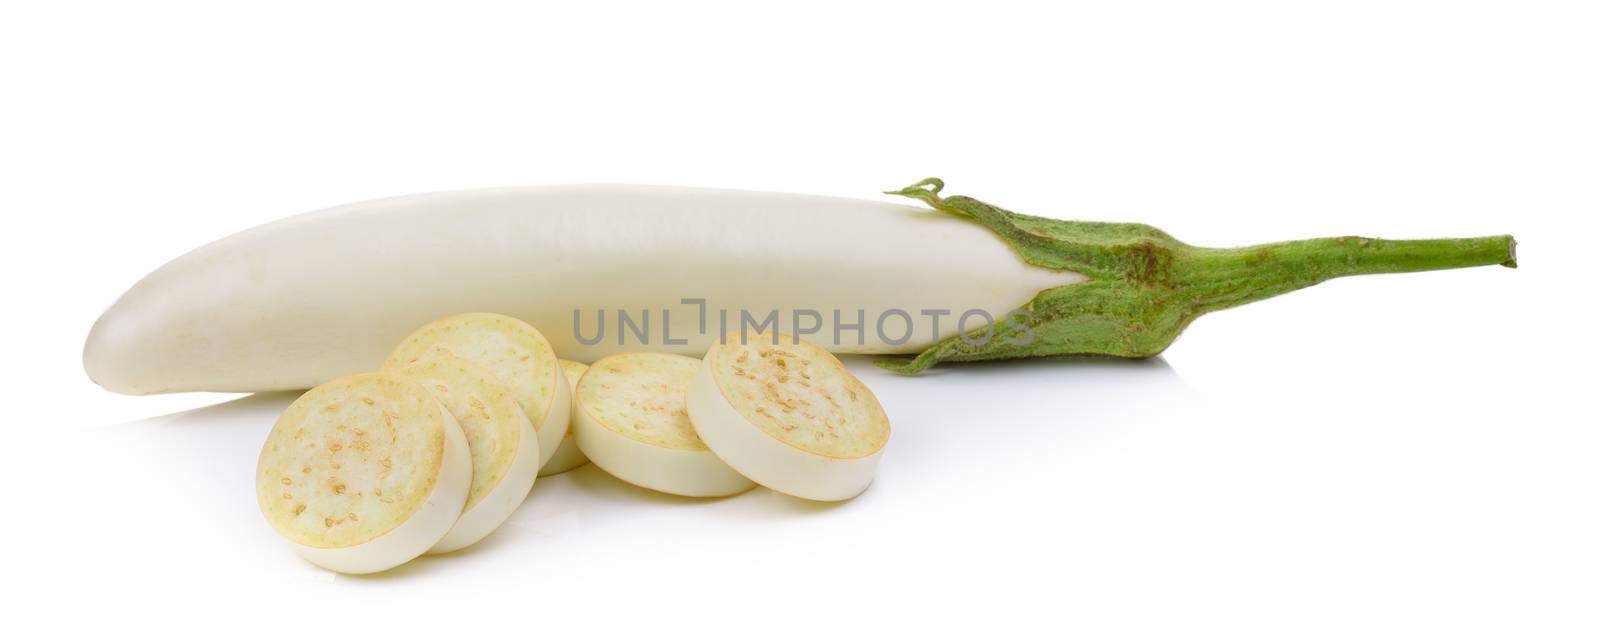 White eggplant on a over white background by sommai